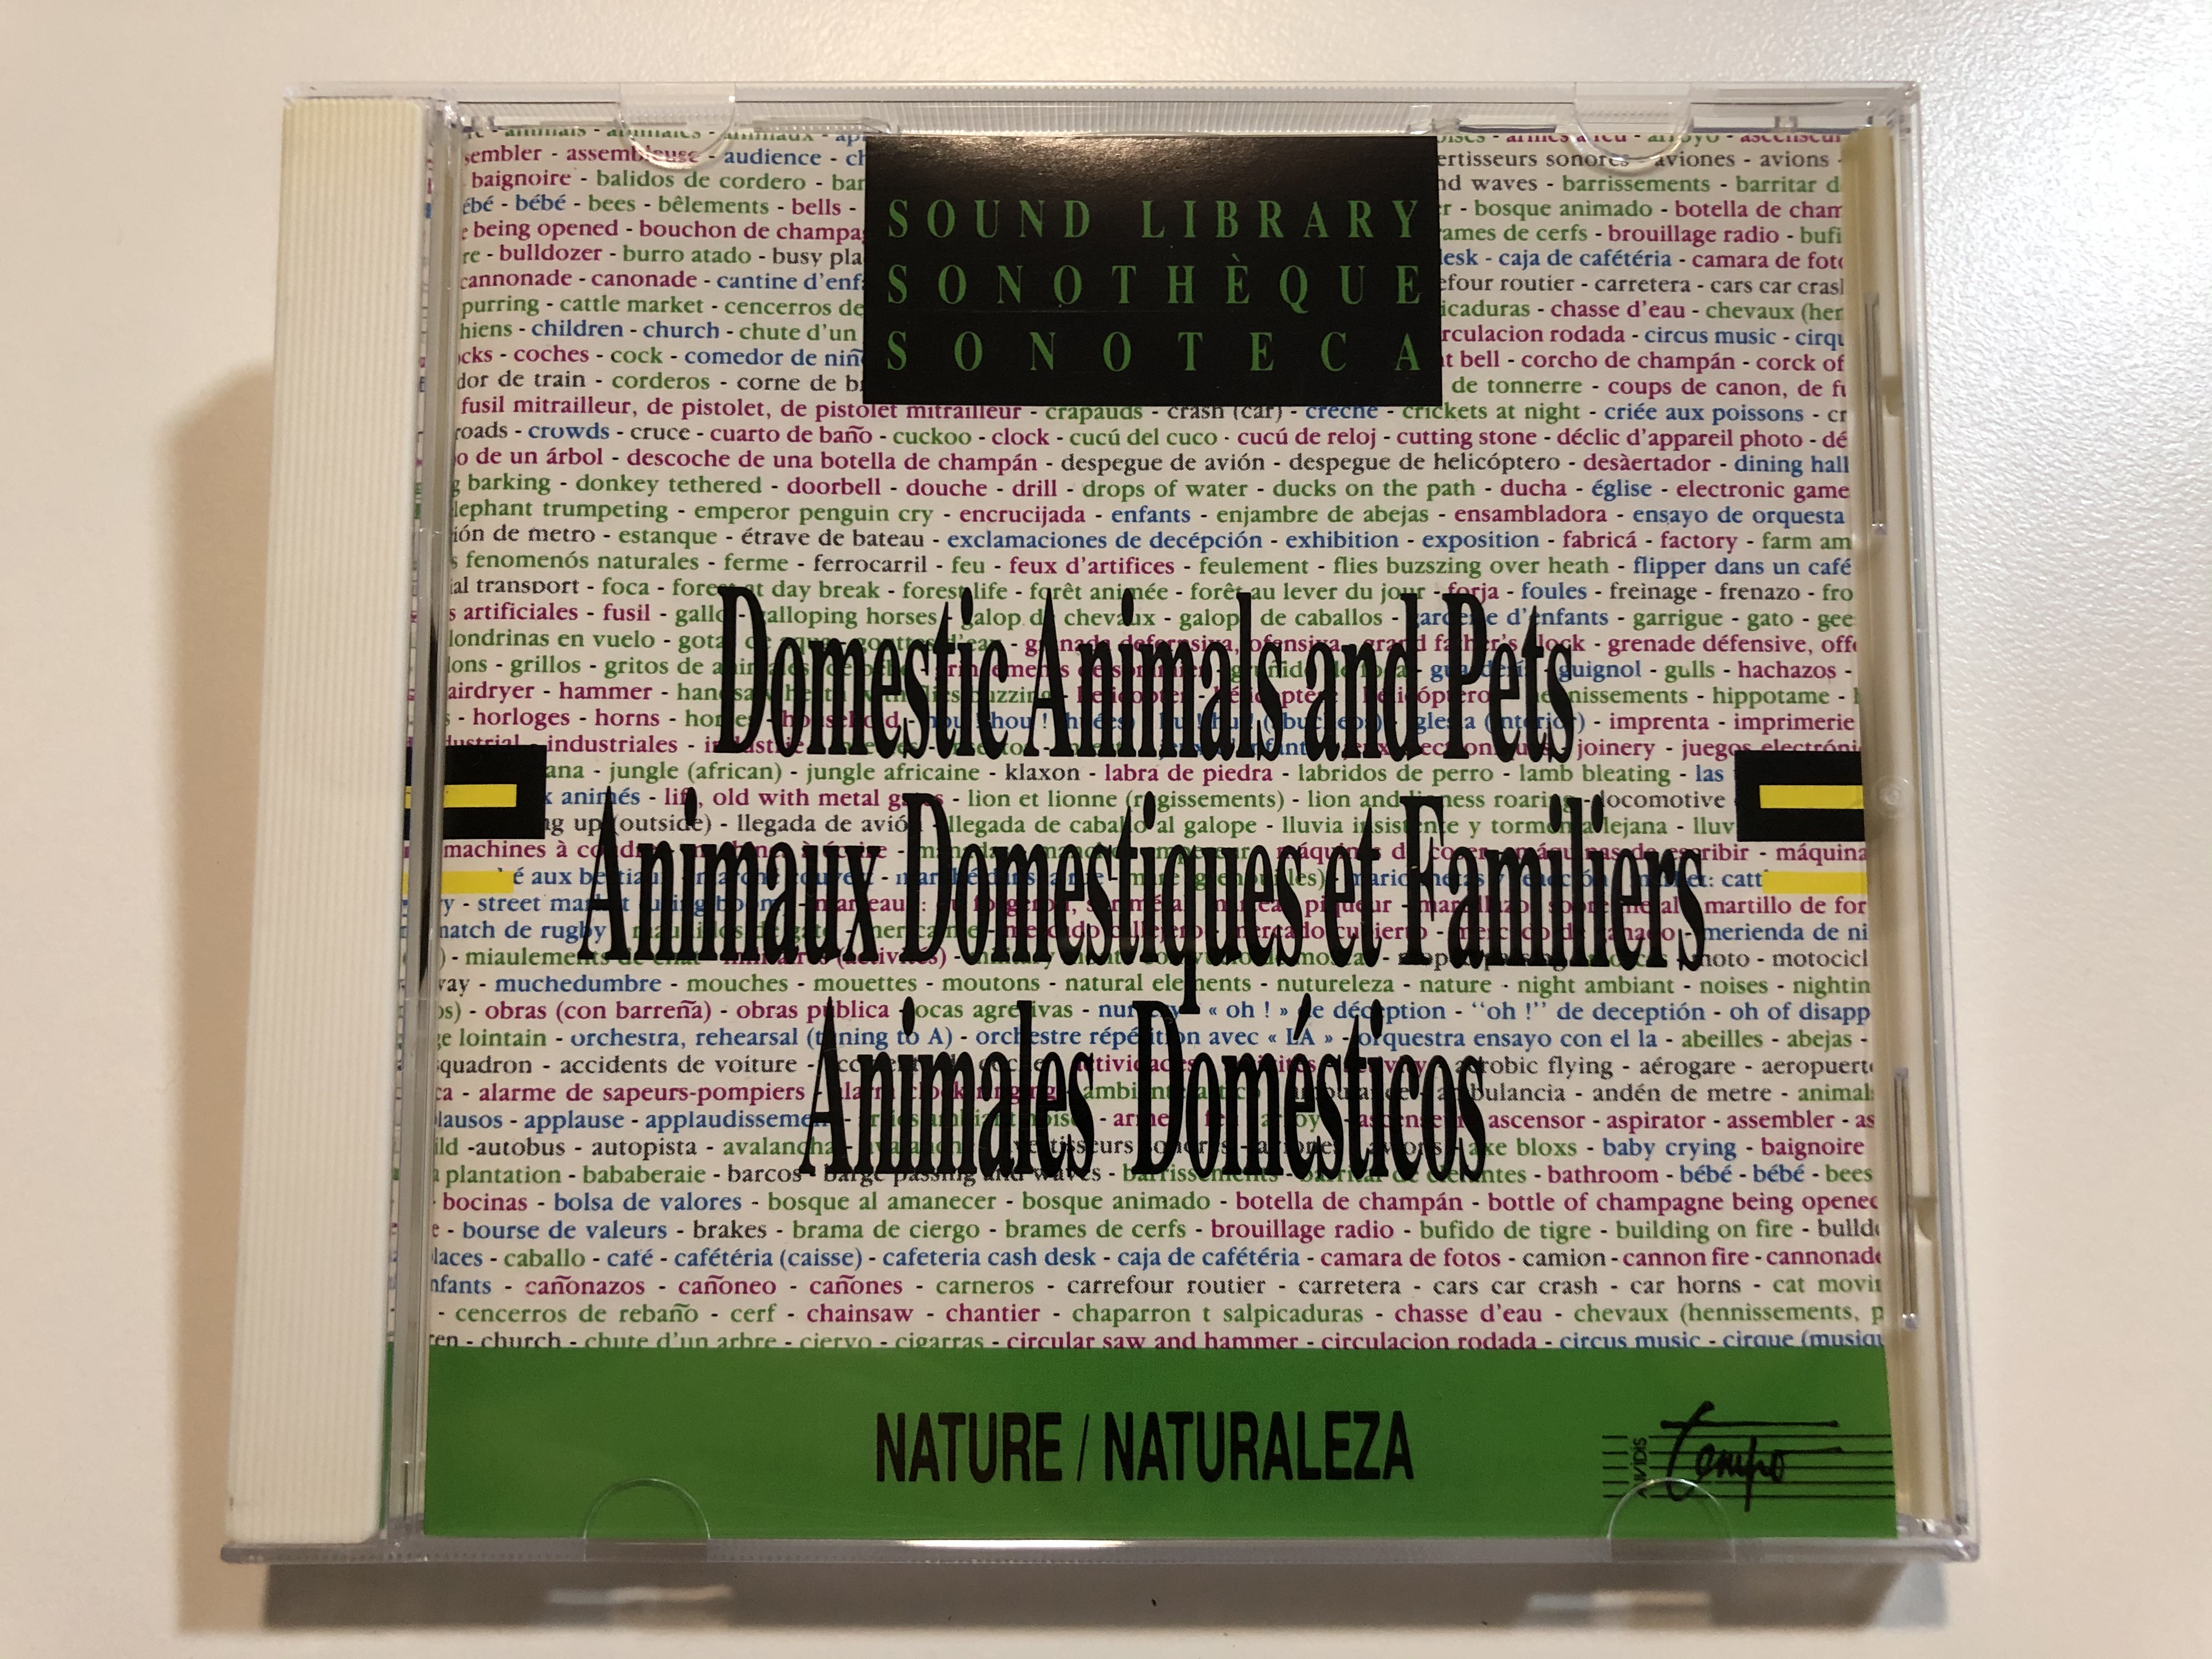 domestic-animals-and-pets-animaux-domestiques-et-familiers-animales-dom-sticos-sound-library-sonoth-que-sonoteca-nature-naturaleza-auvidis-tempo-audio-cd-1991-stereo-a-6178-1-.jpg